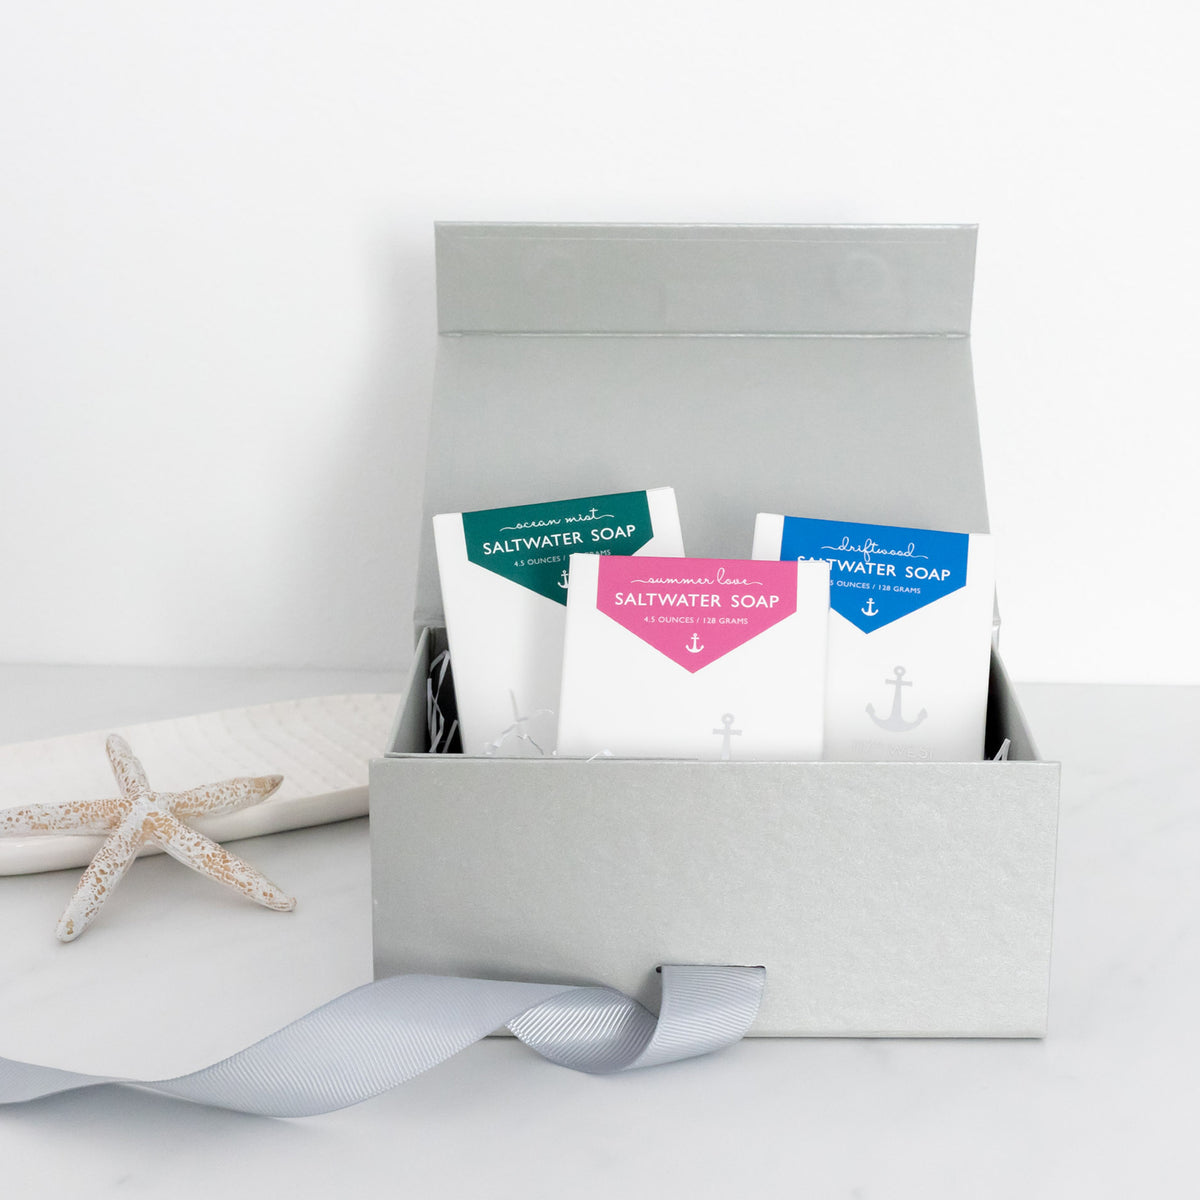 three saltwater soaps in a gift box, white background